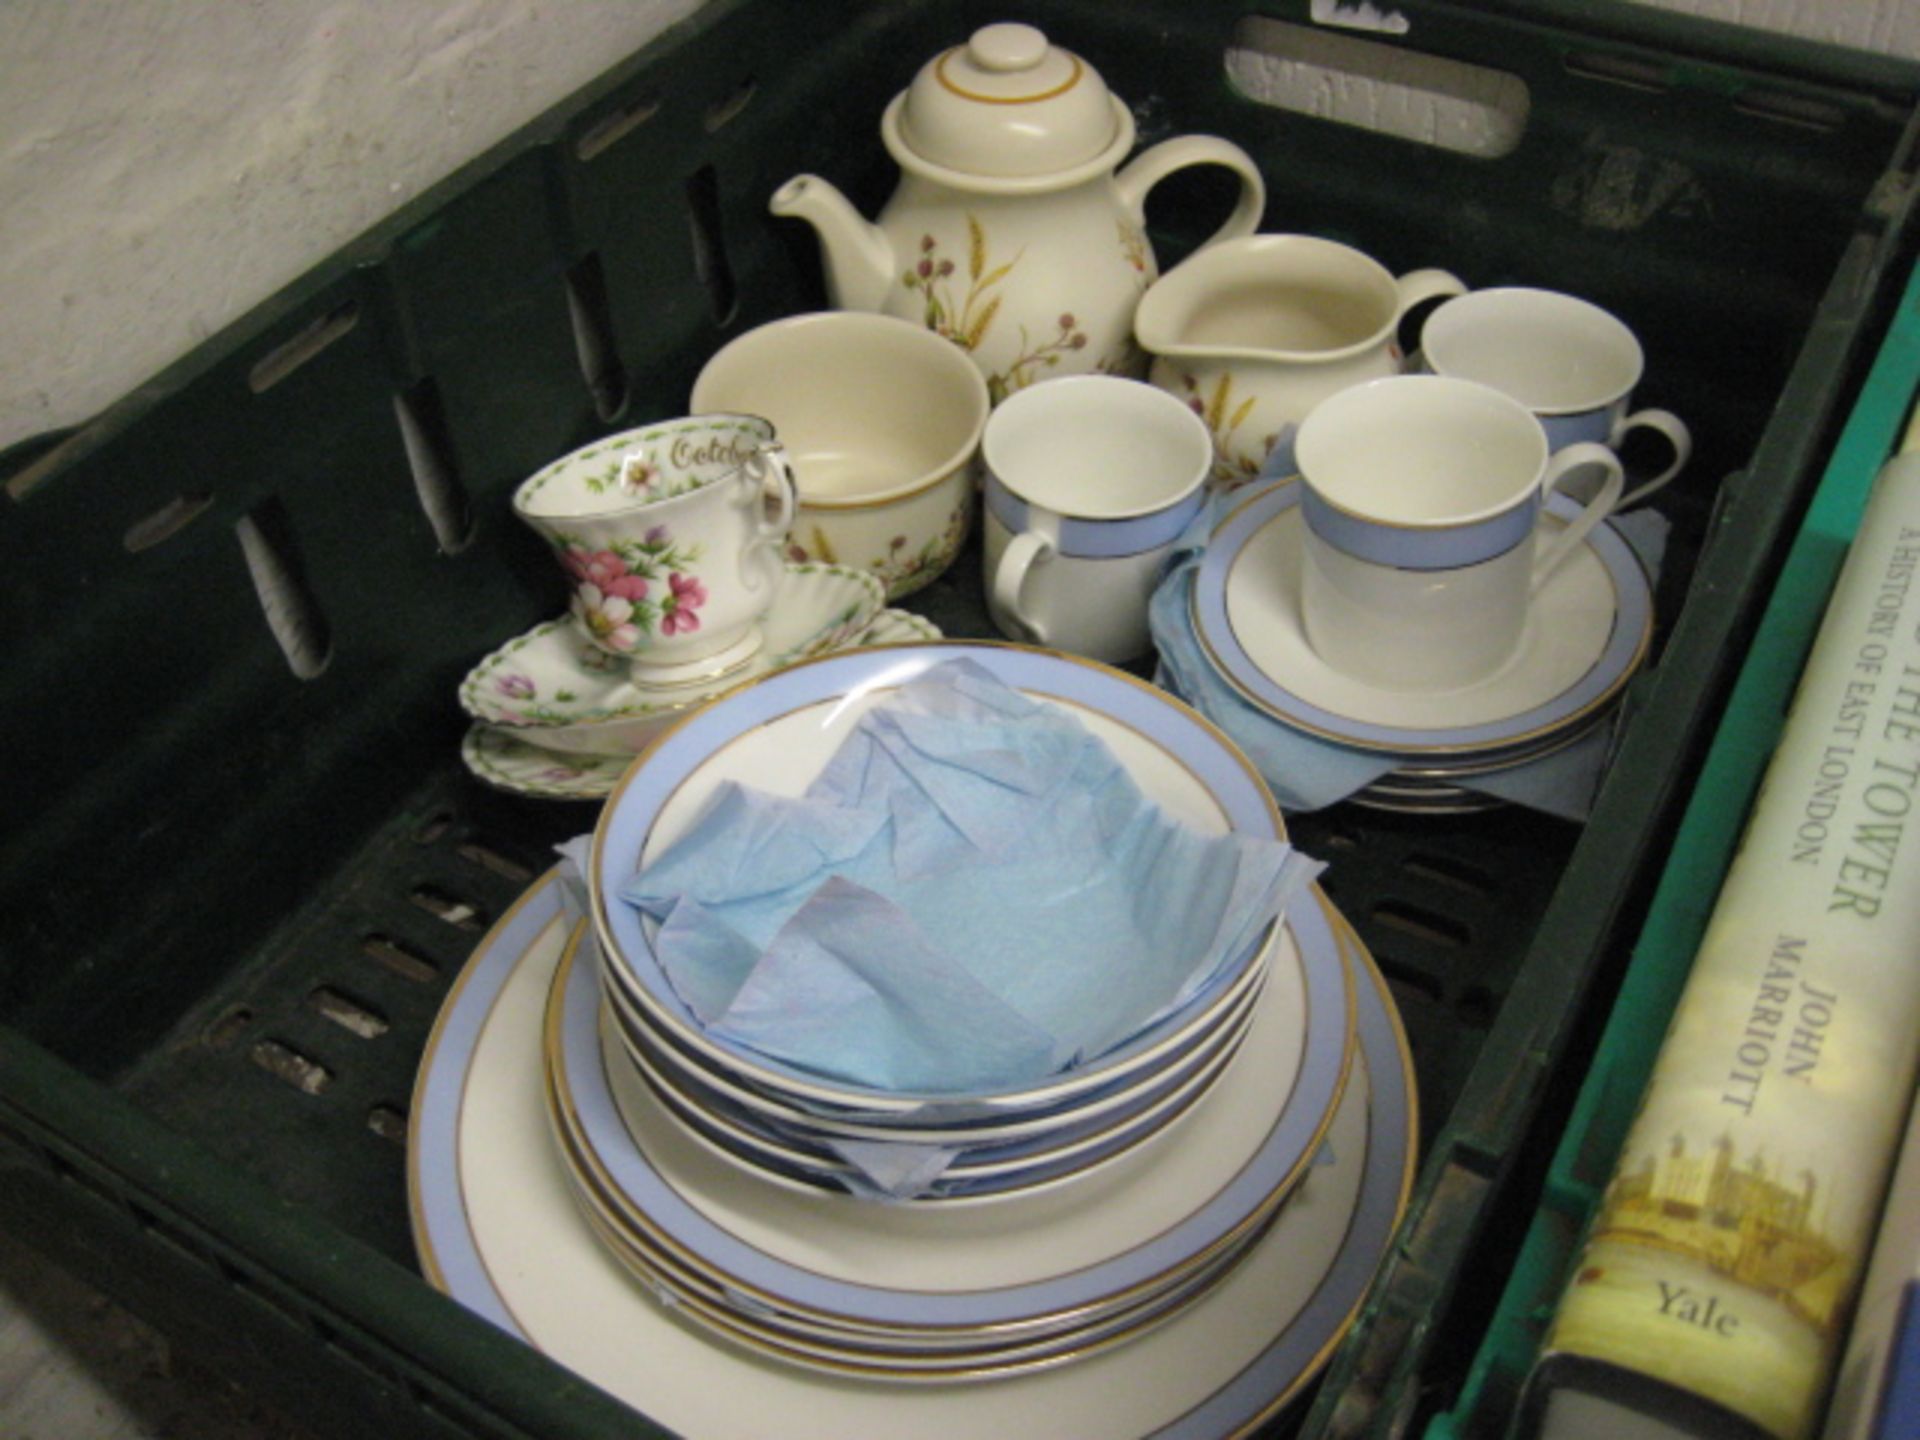 Crate containing Royal Doulton Regency Gold part tea service, Royal Albert sup, saucer and side